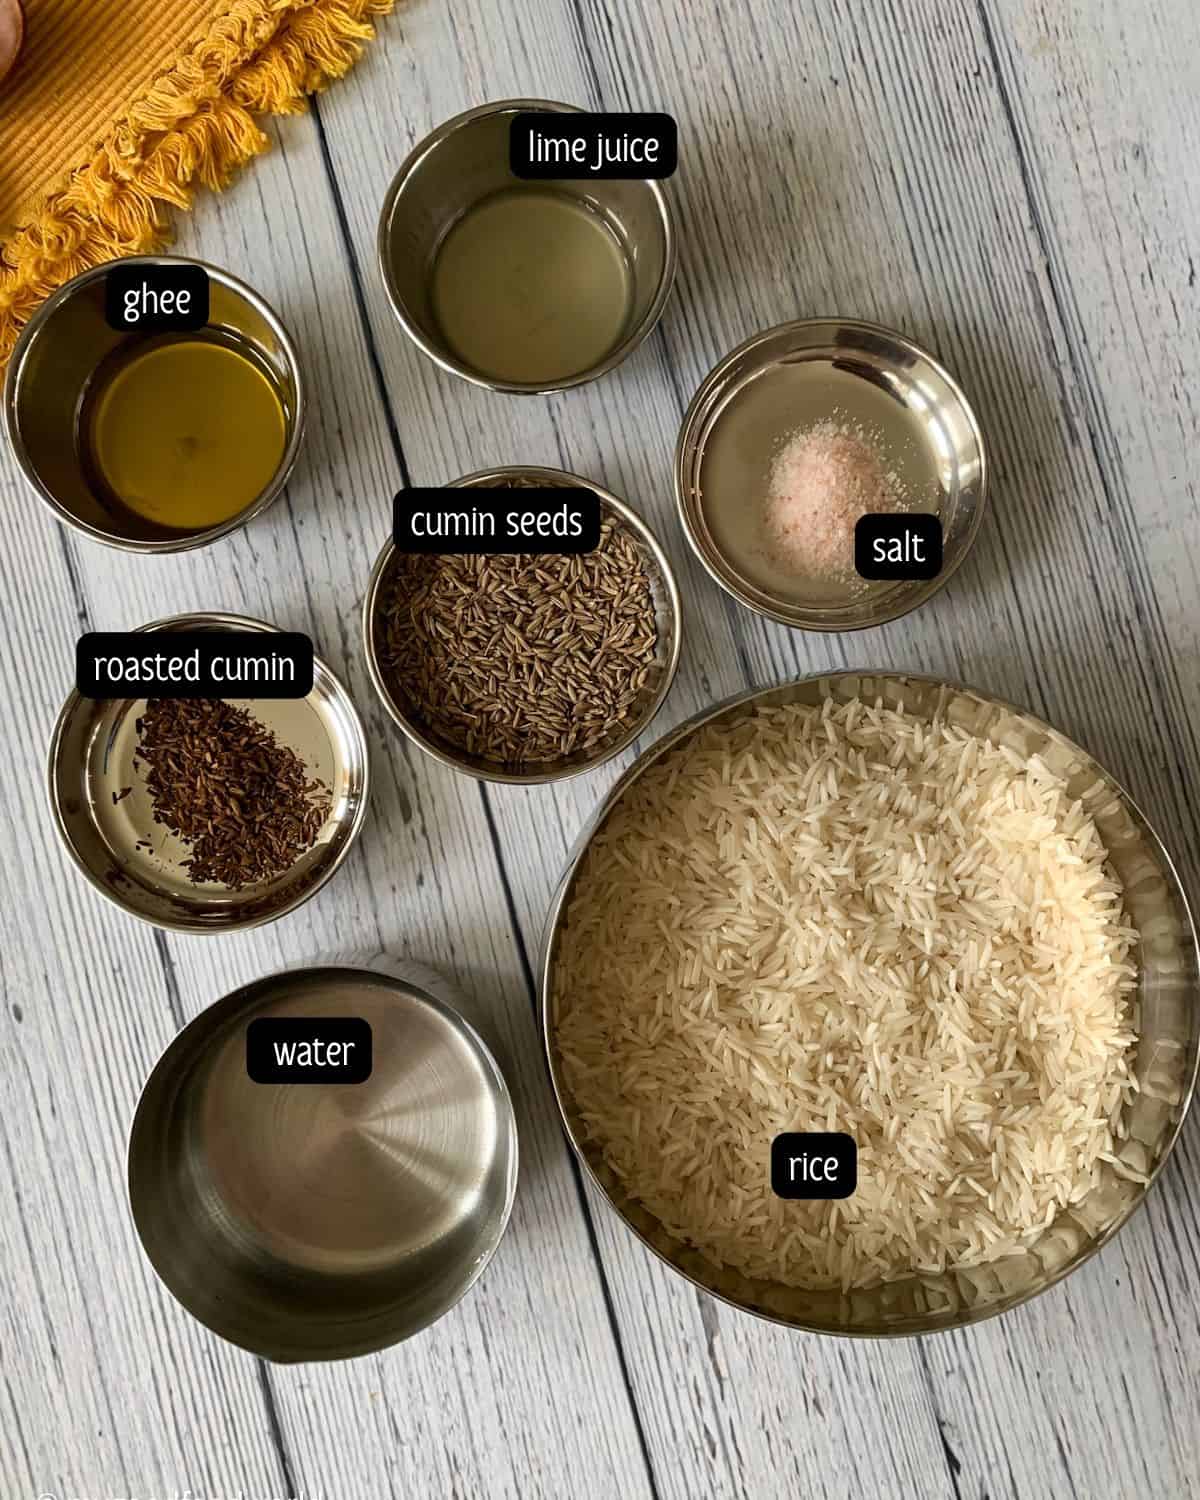 Ingredients such as rice, water, cumin seeds, salt, ghee, lime juice, and roasted cumin are placed in steel bowls and plates.